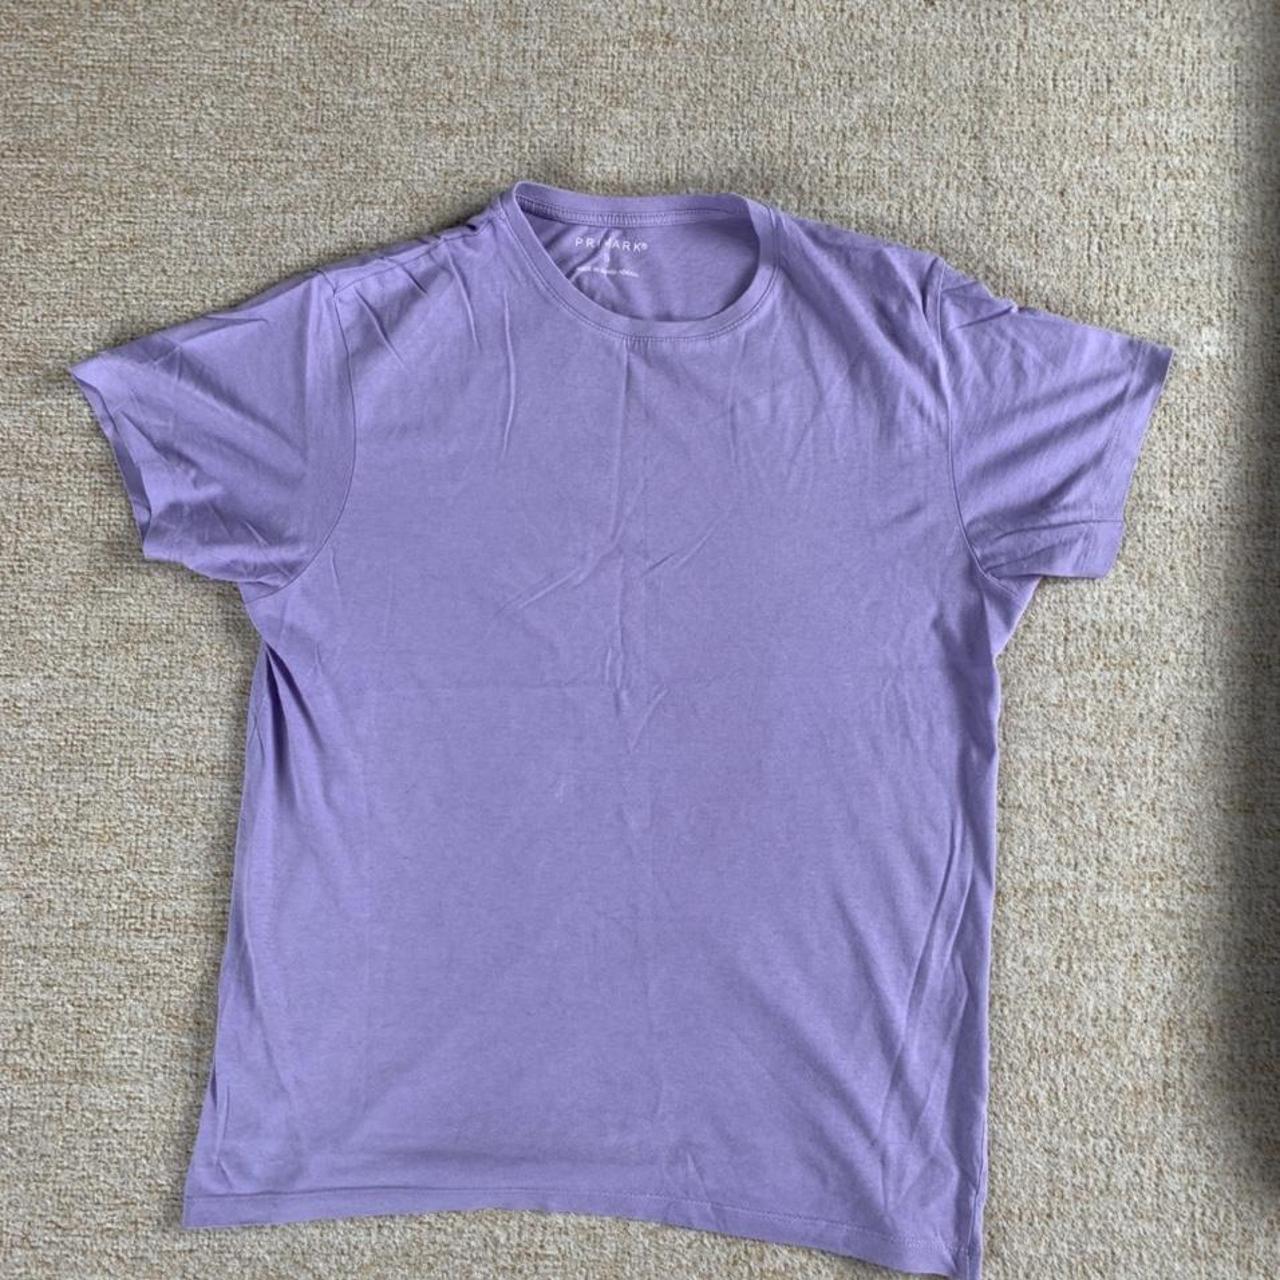 Lilac Primark T-shirt. In excellent condition. Size... - Depop